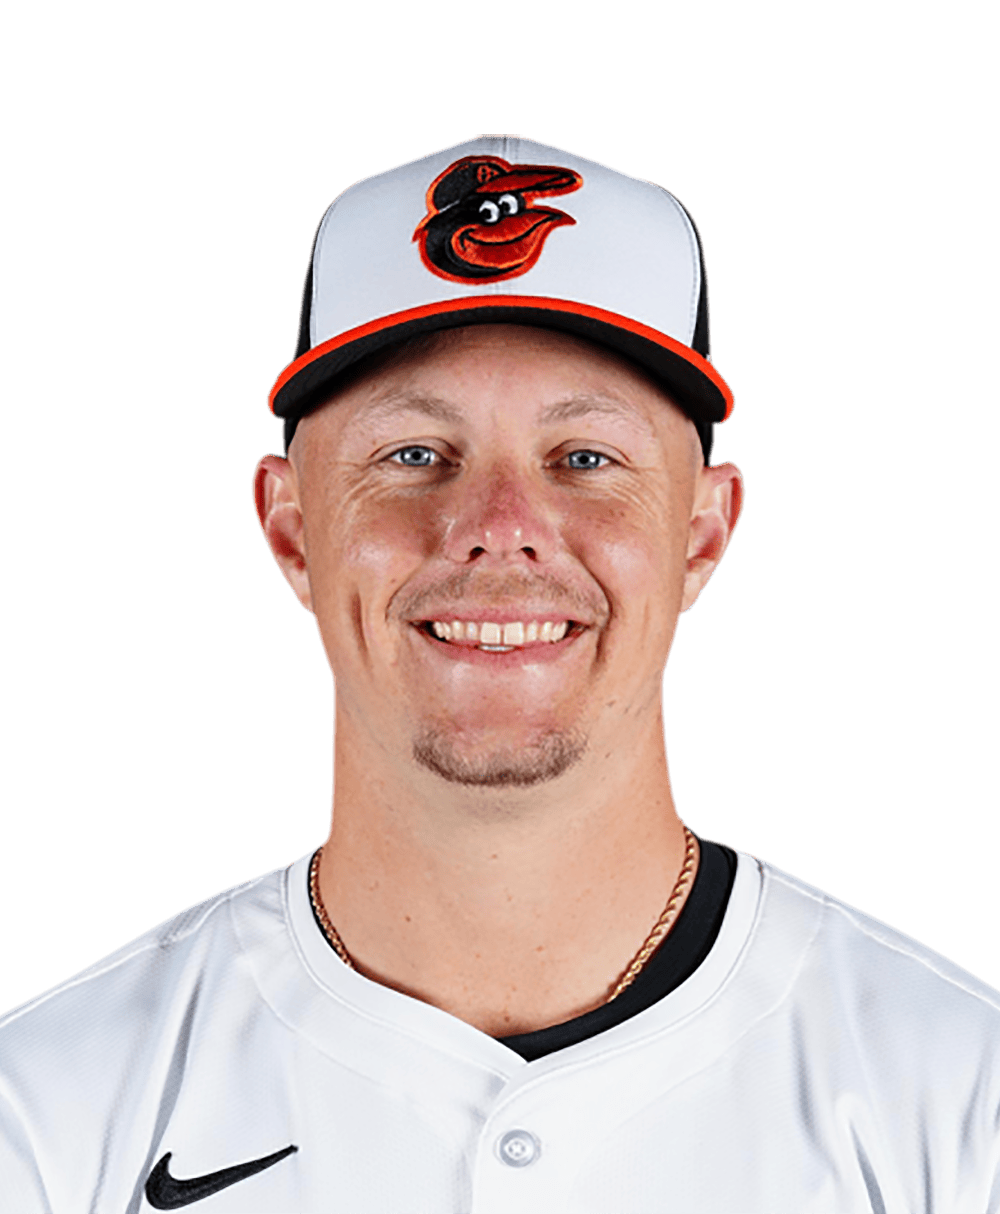 Henderson doubles twice in home debut, Orioles beat A's 5-2 - The